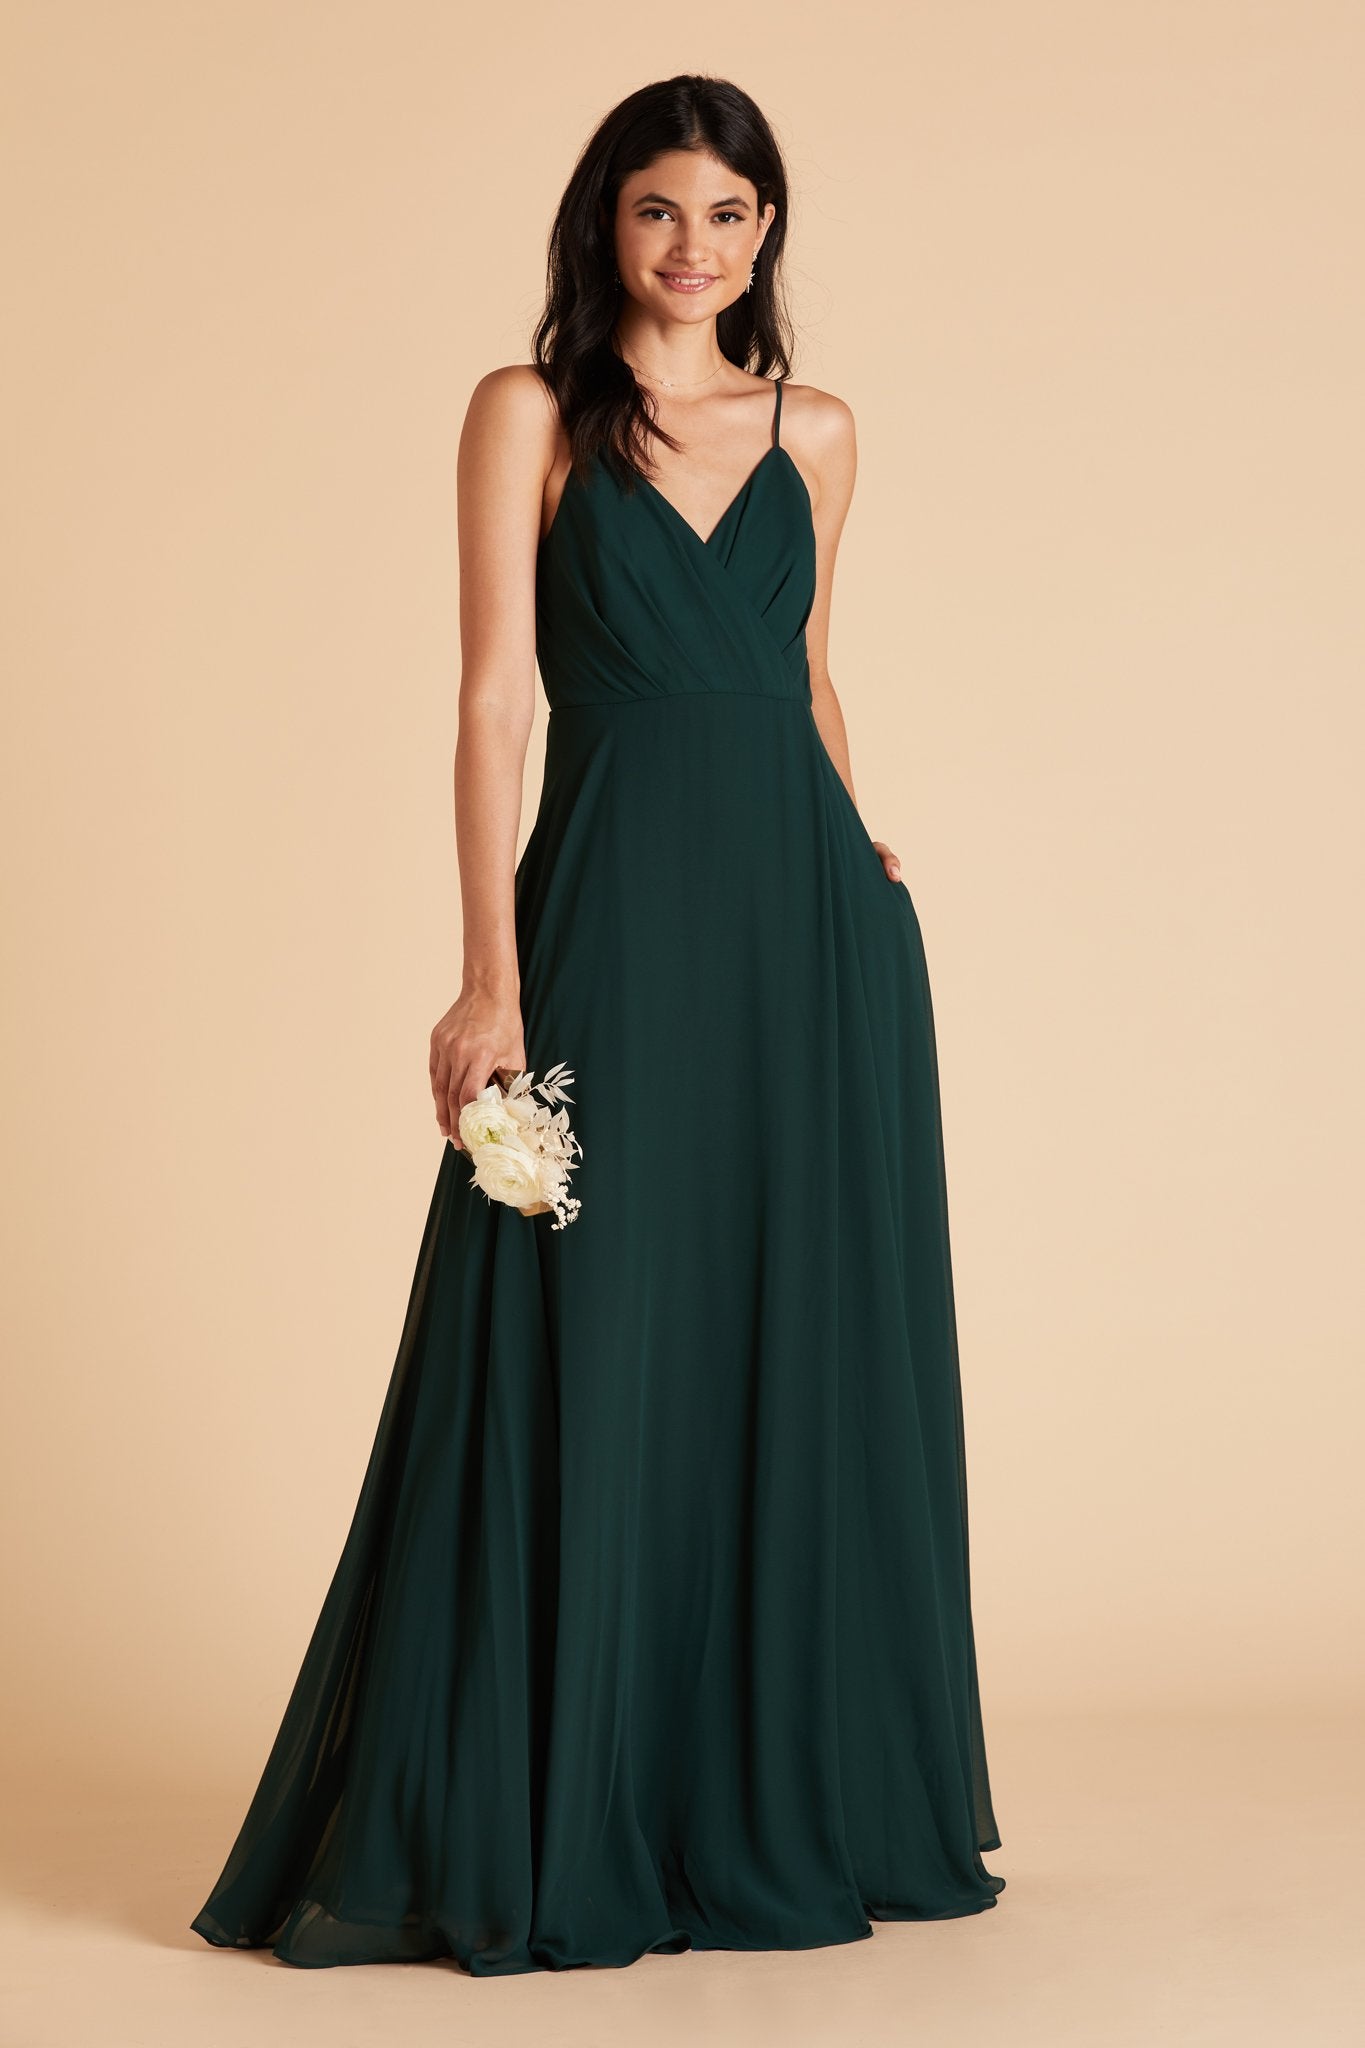 Kaia bridesmaids dress in emerald green chiffon by Birdy Grey, front view with hand in pocket